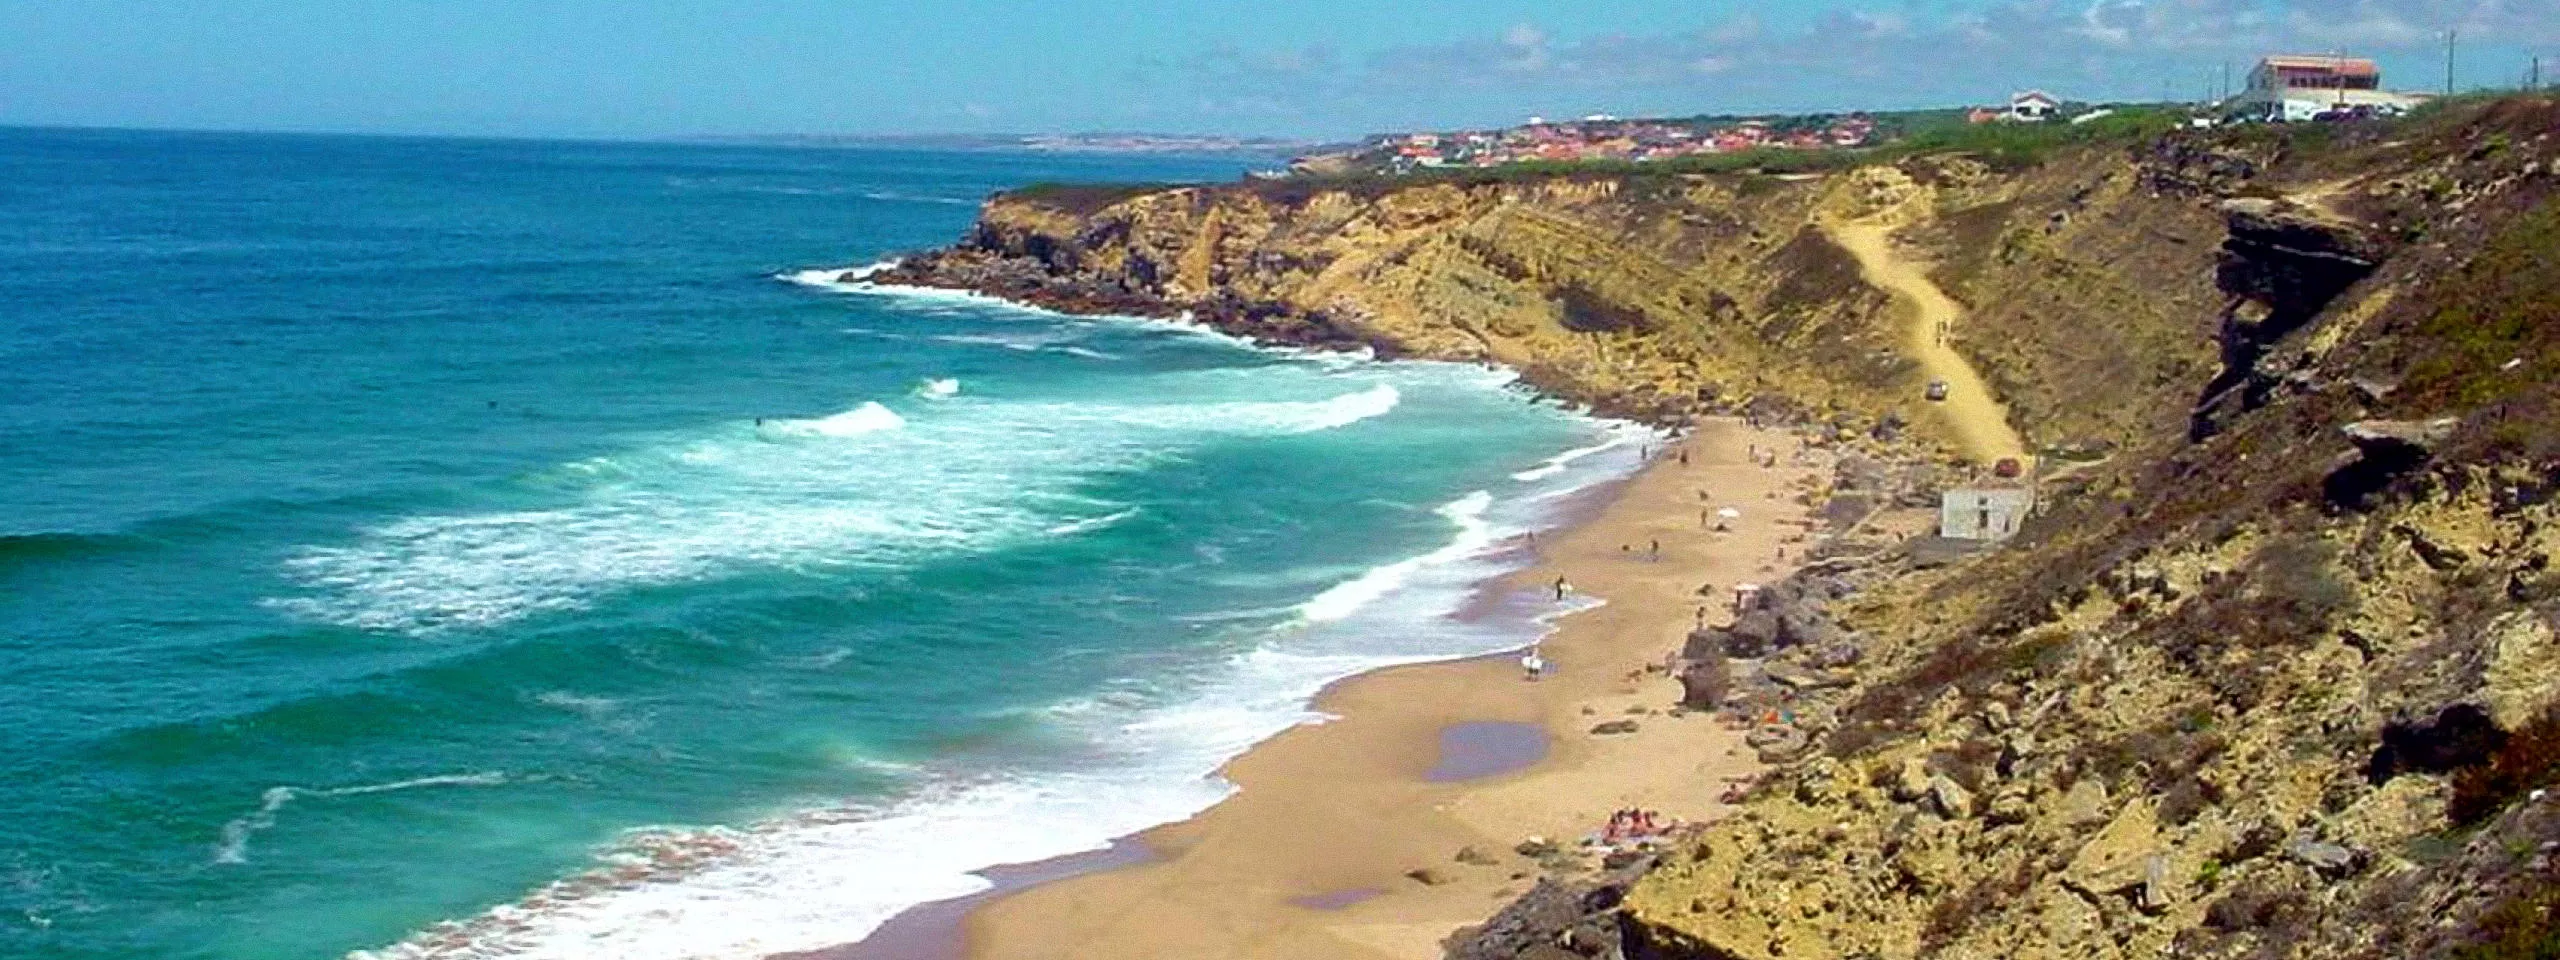 North Beach in Portugal, Europe | Surfing,Beaches - Rated 3.8